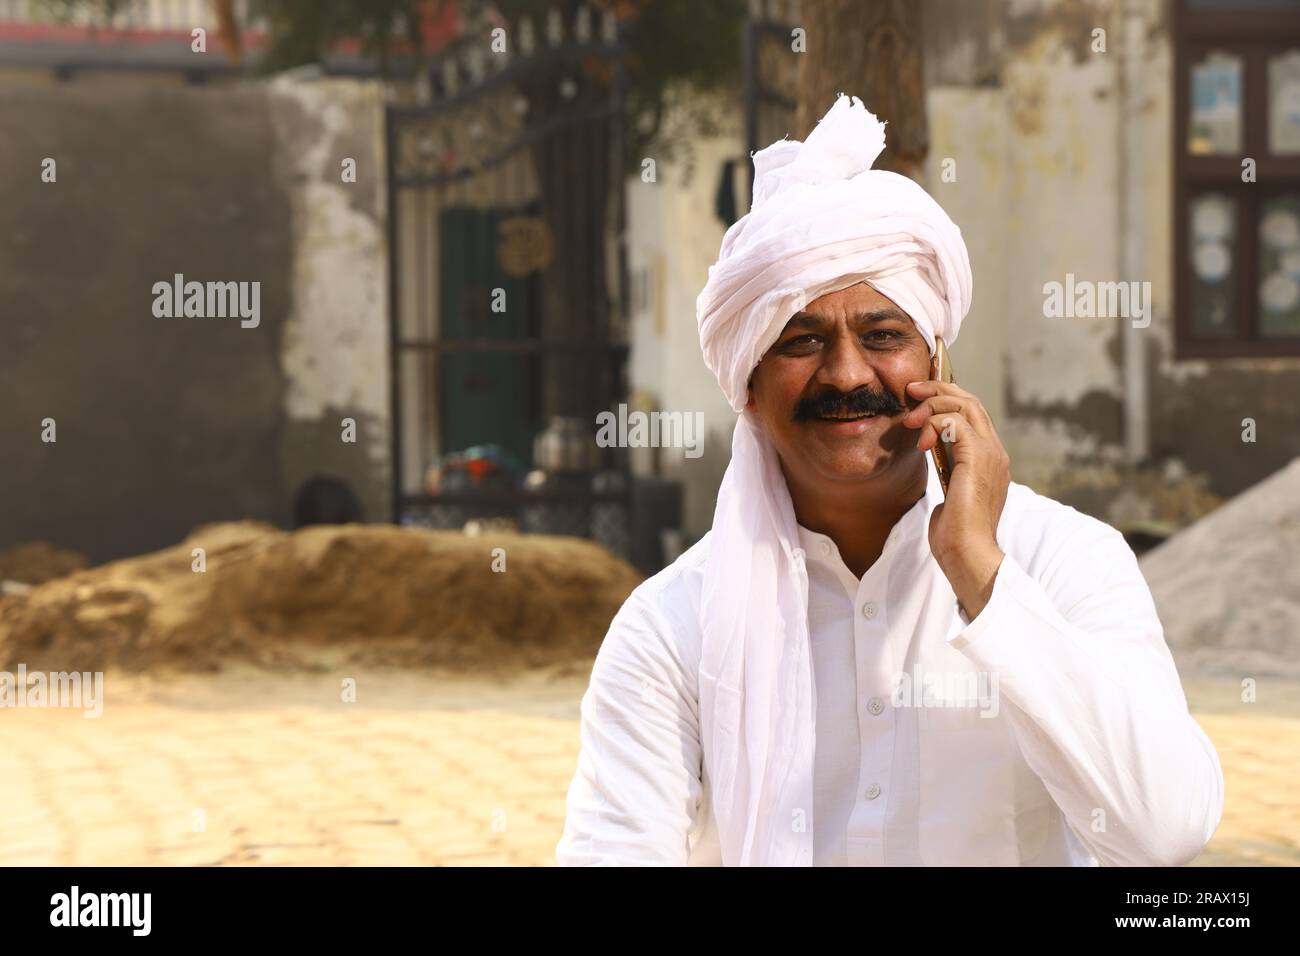 man sitting in Rural wearing kurta-pajama which is traditional Dress for men in North India in day time & Enjoying talking on mobile phone Stock Photo